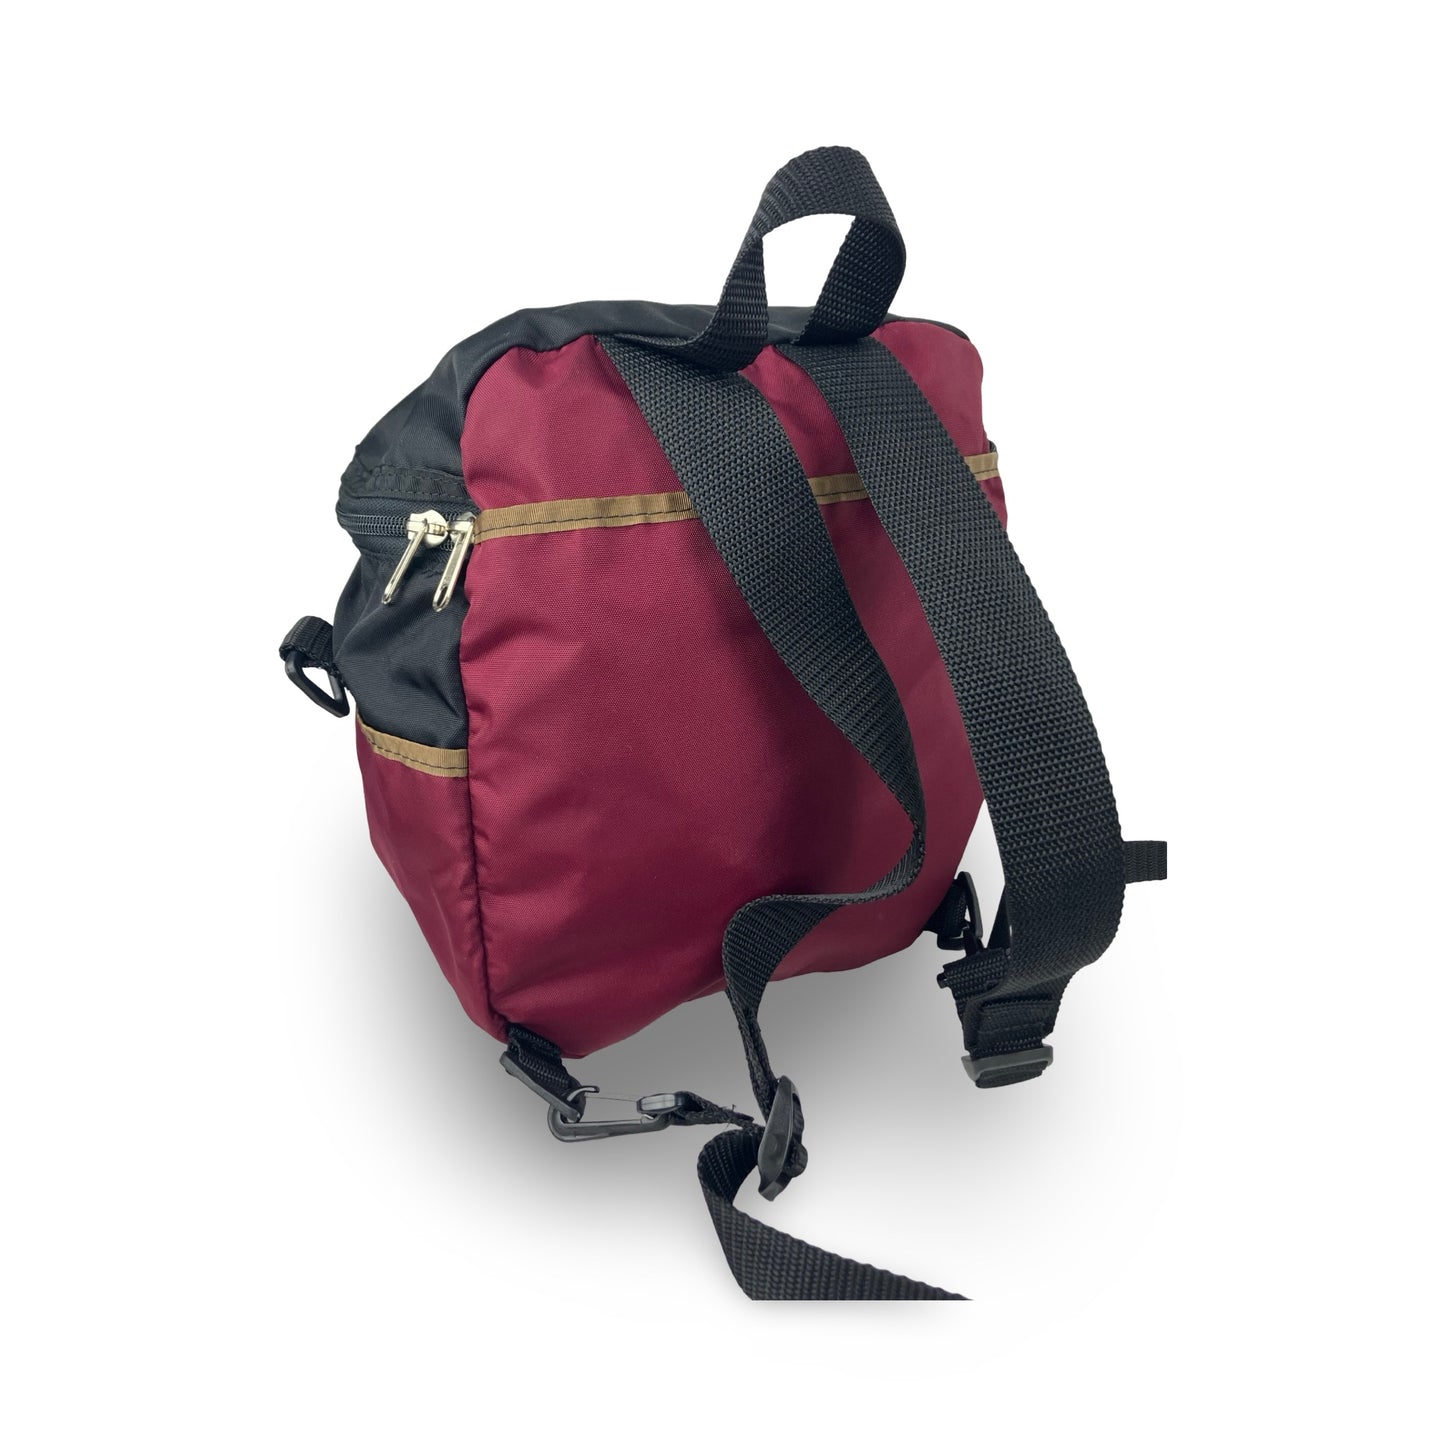 PAZAN Pack Minimalist Backpacks, by Tough Traveler. Made in USA since 1970